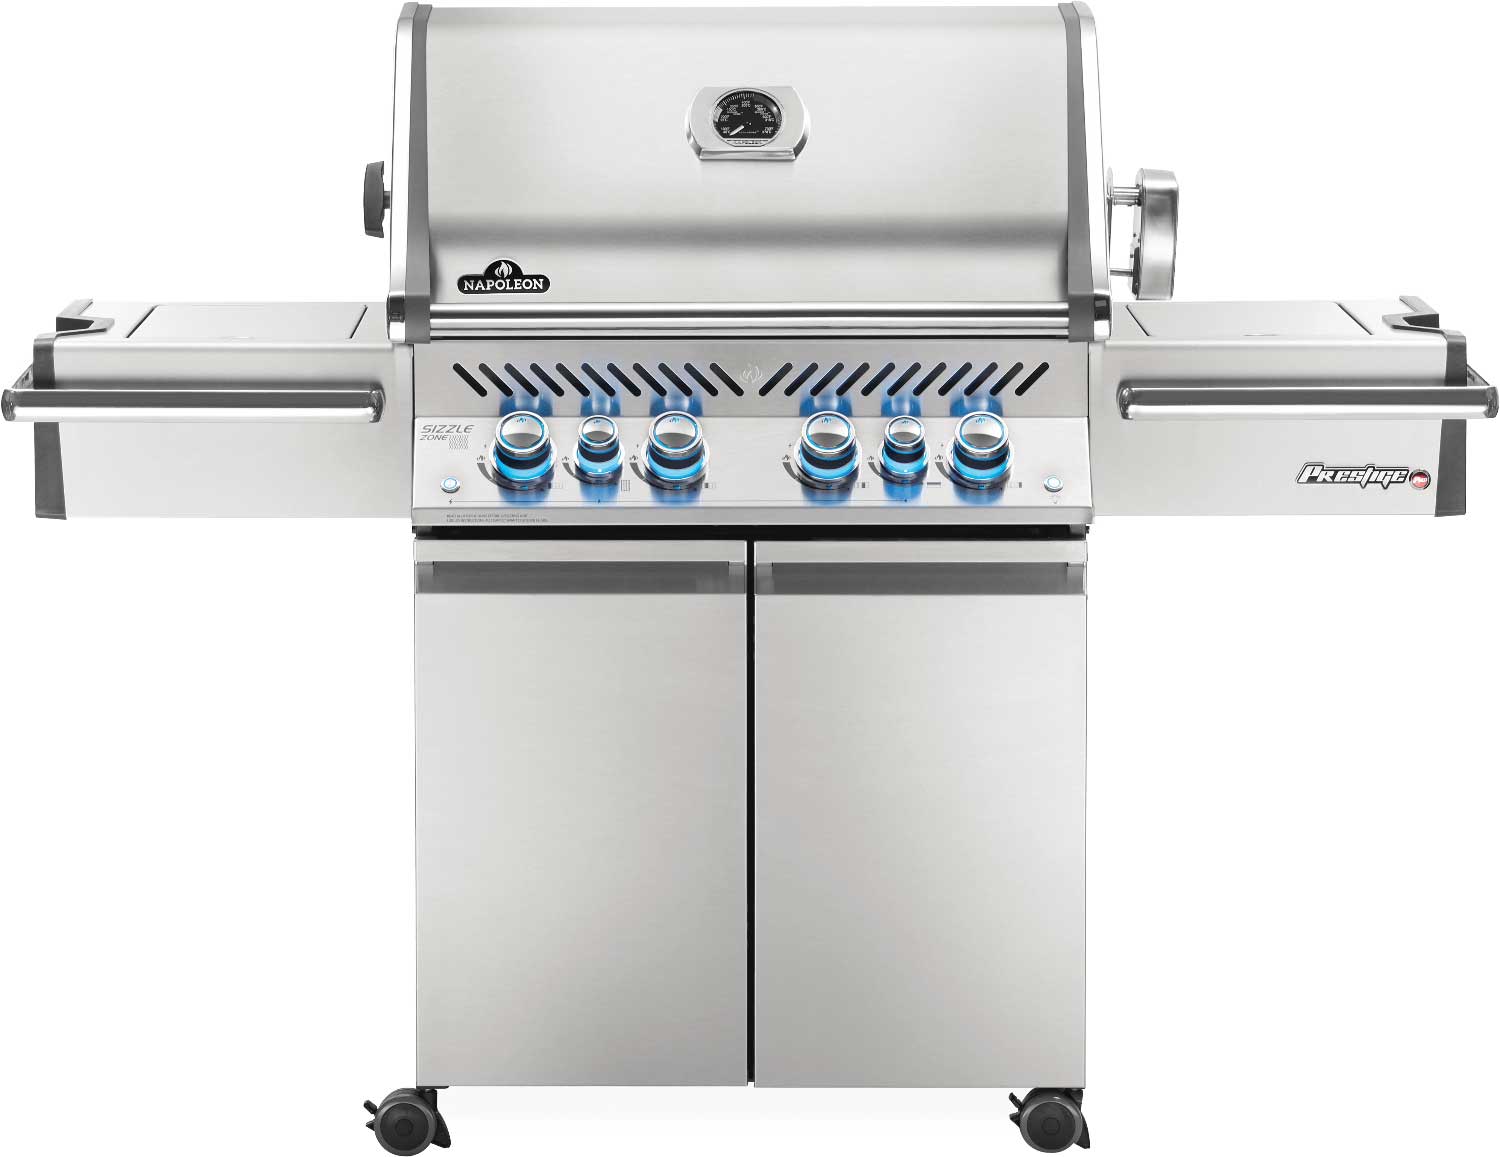 Napoleon Grills Prestige PRO 500 Gas Grill with Infrared Side and Rear Burners, Stainless Steel Outdoor Grills Liquid Propane 12029738